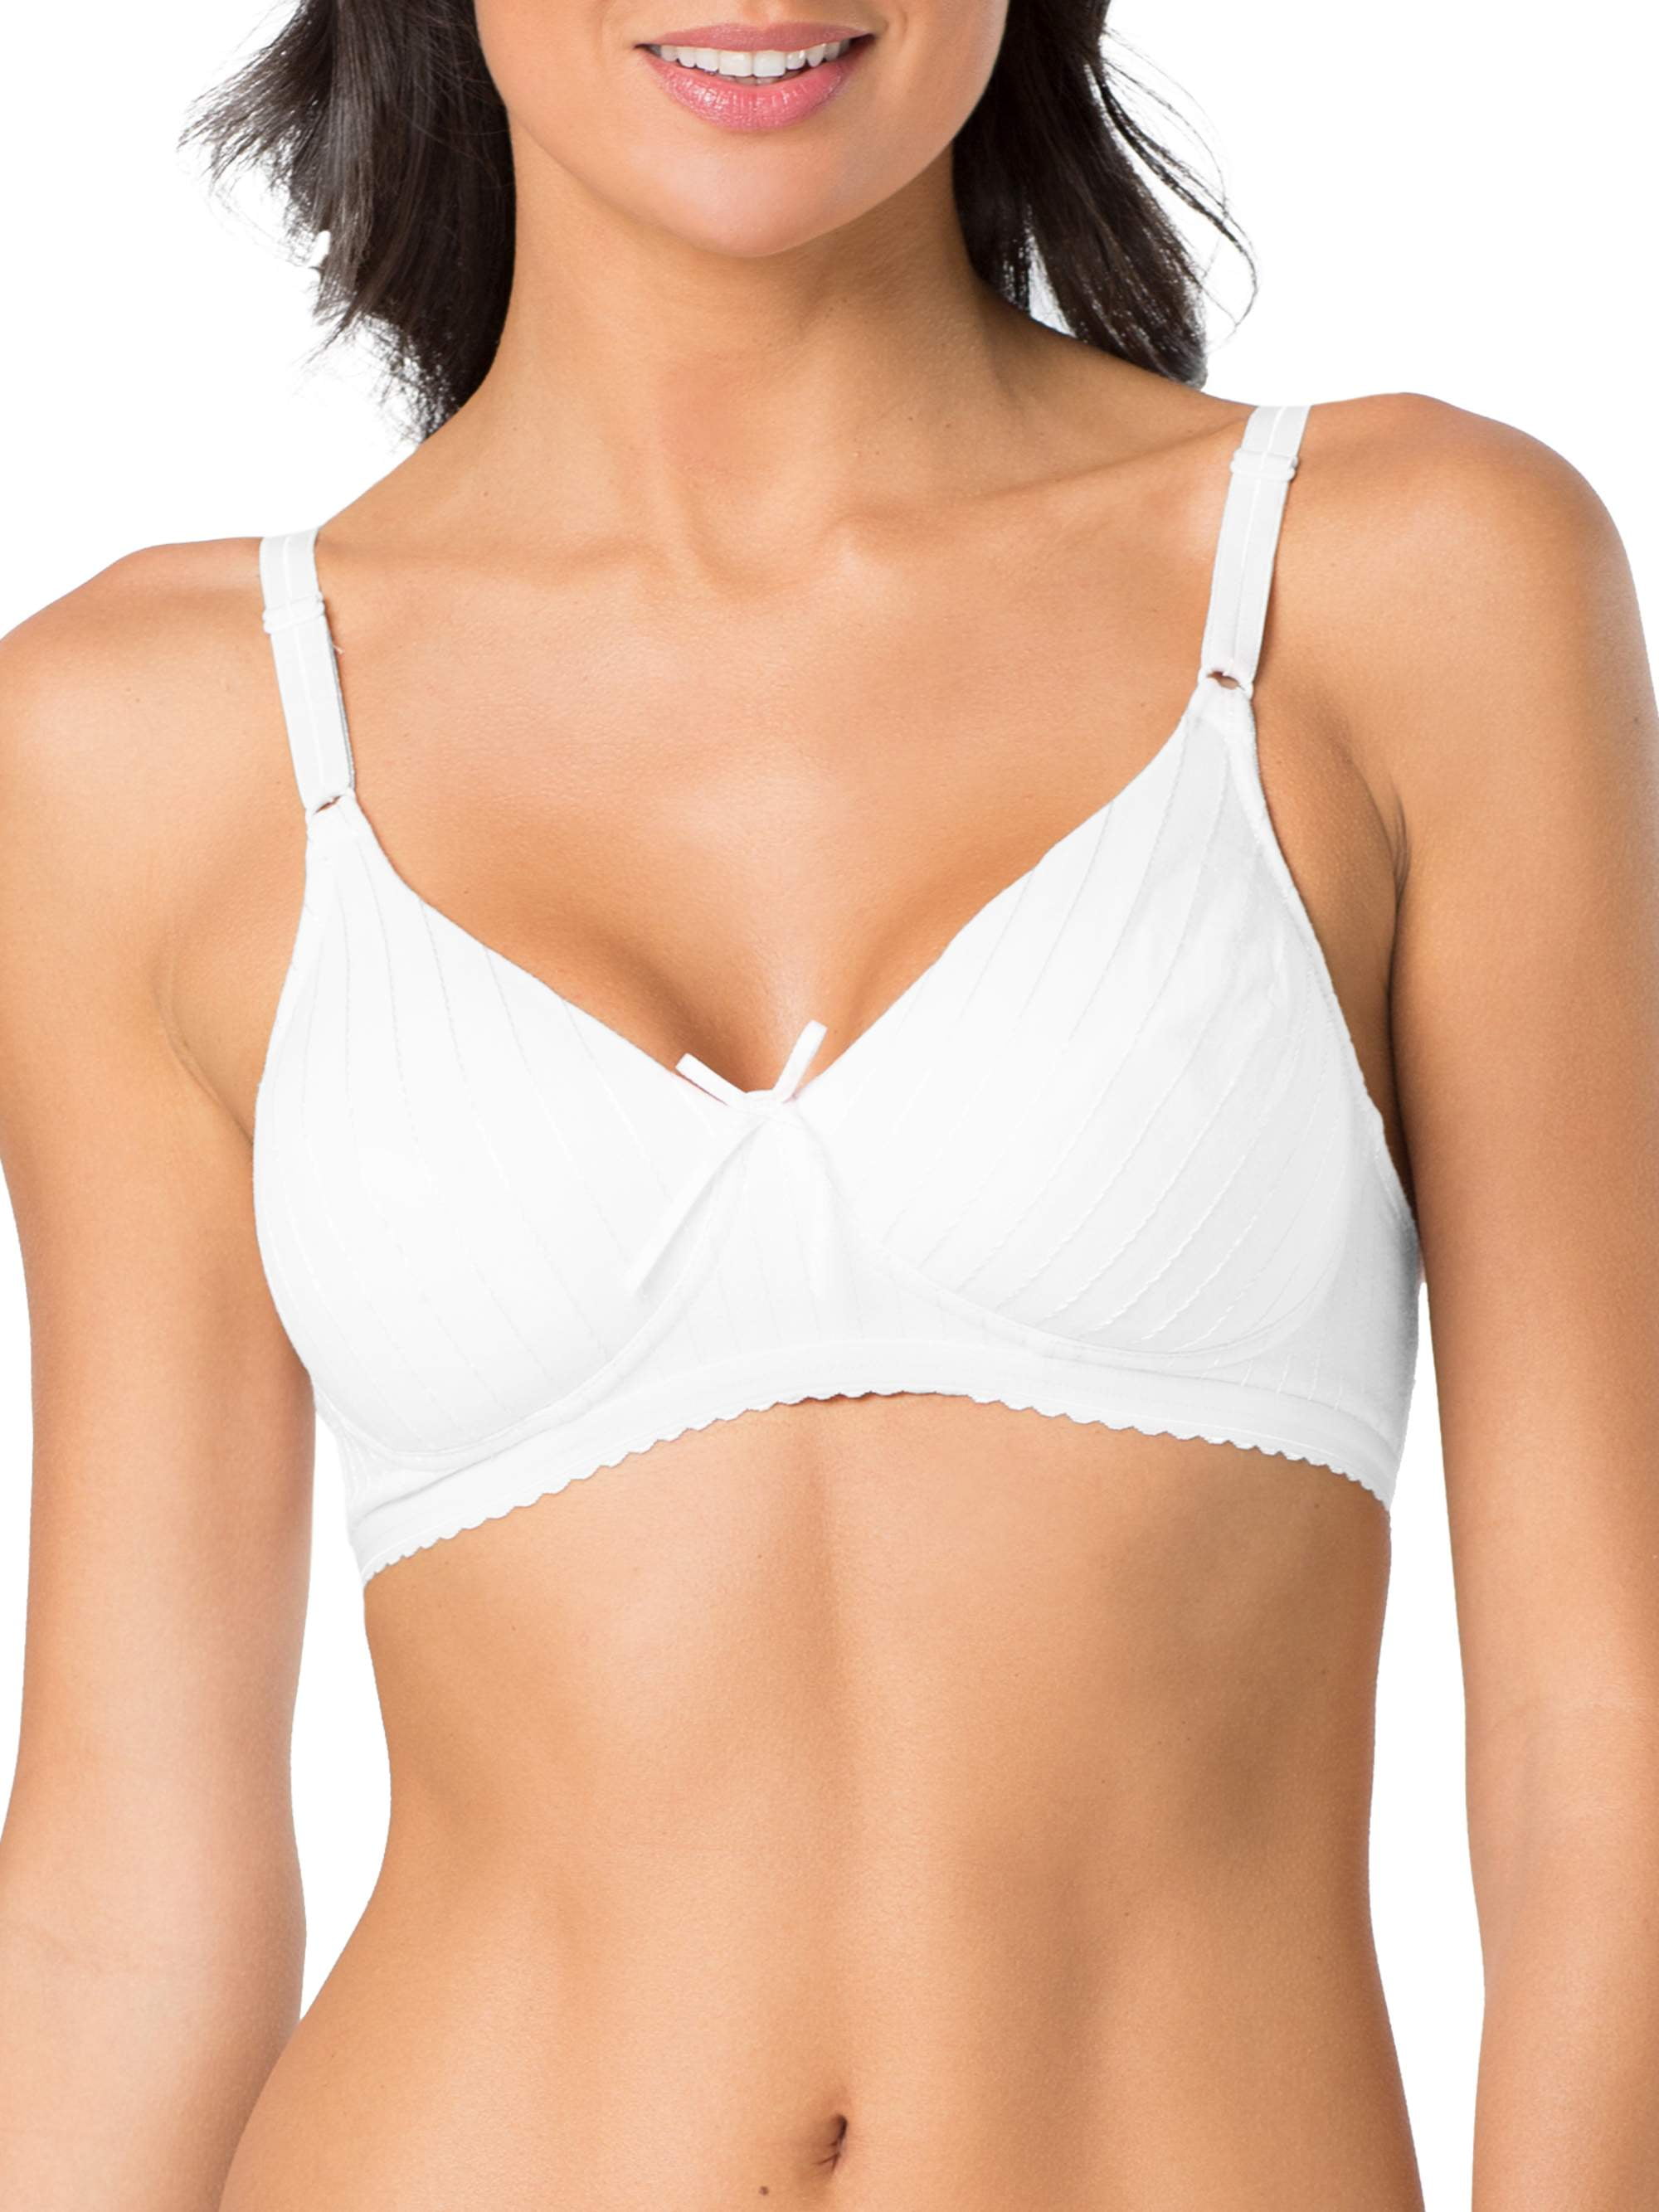 Fruit of the Loom Women's Fleece Lined Wire-free Softcup Bra, Style 96248 